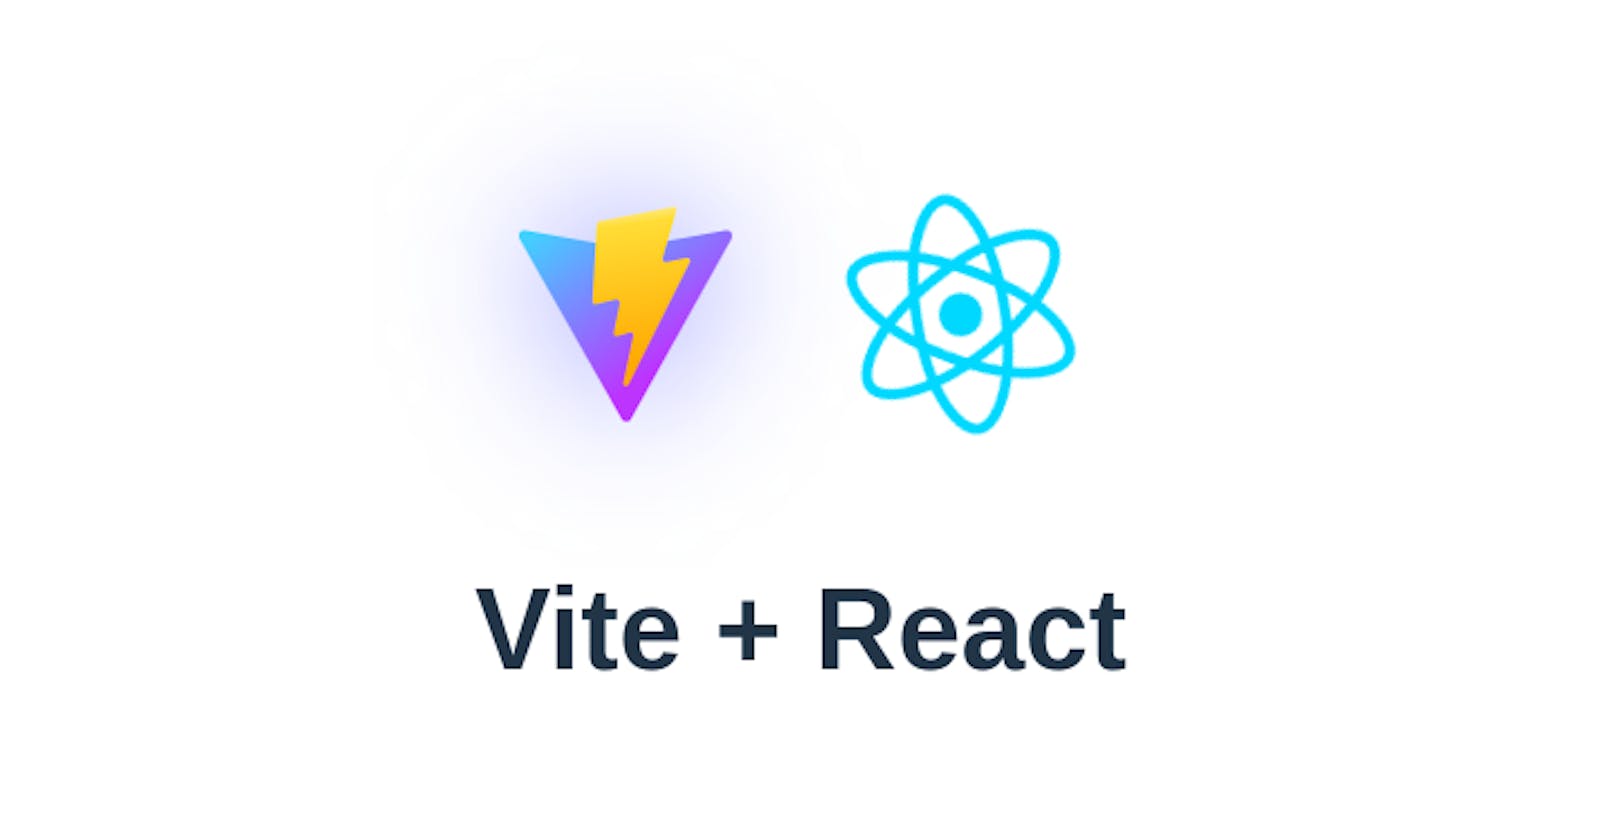 What is Vite?